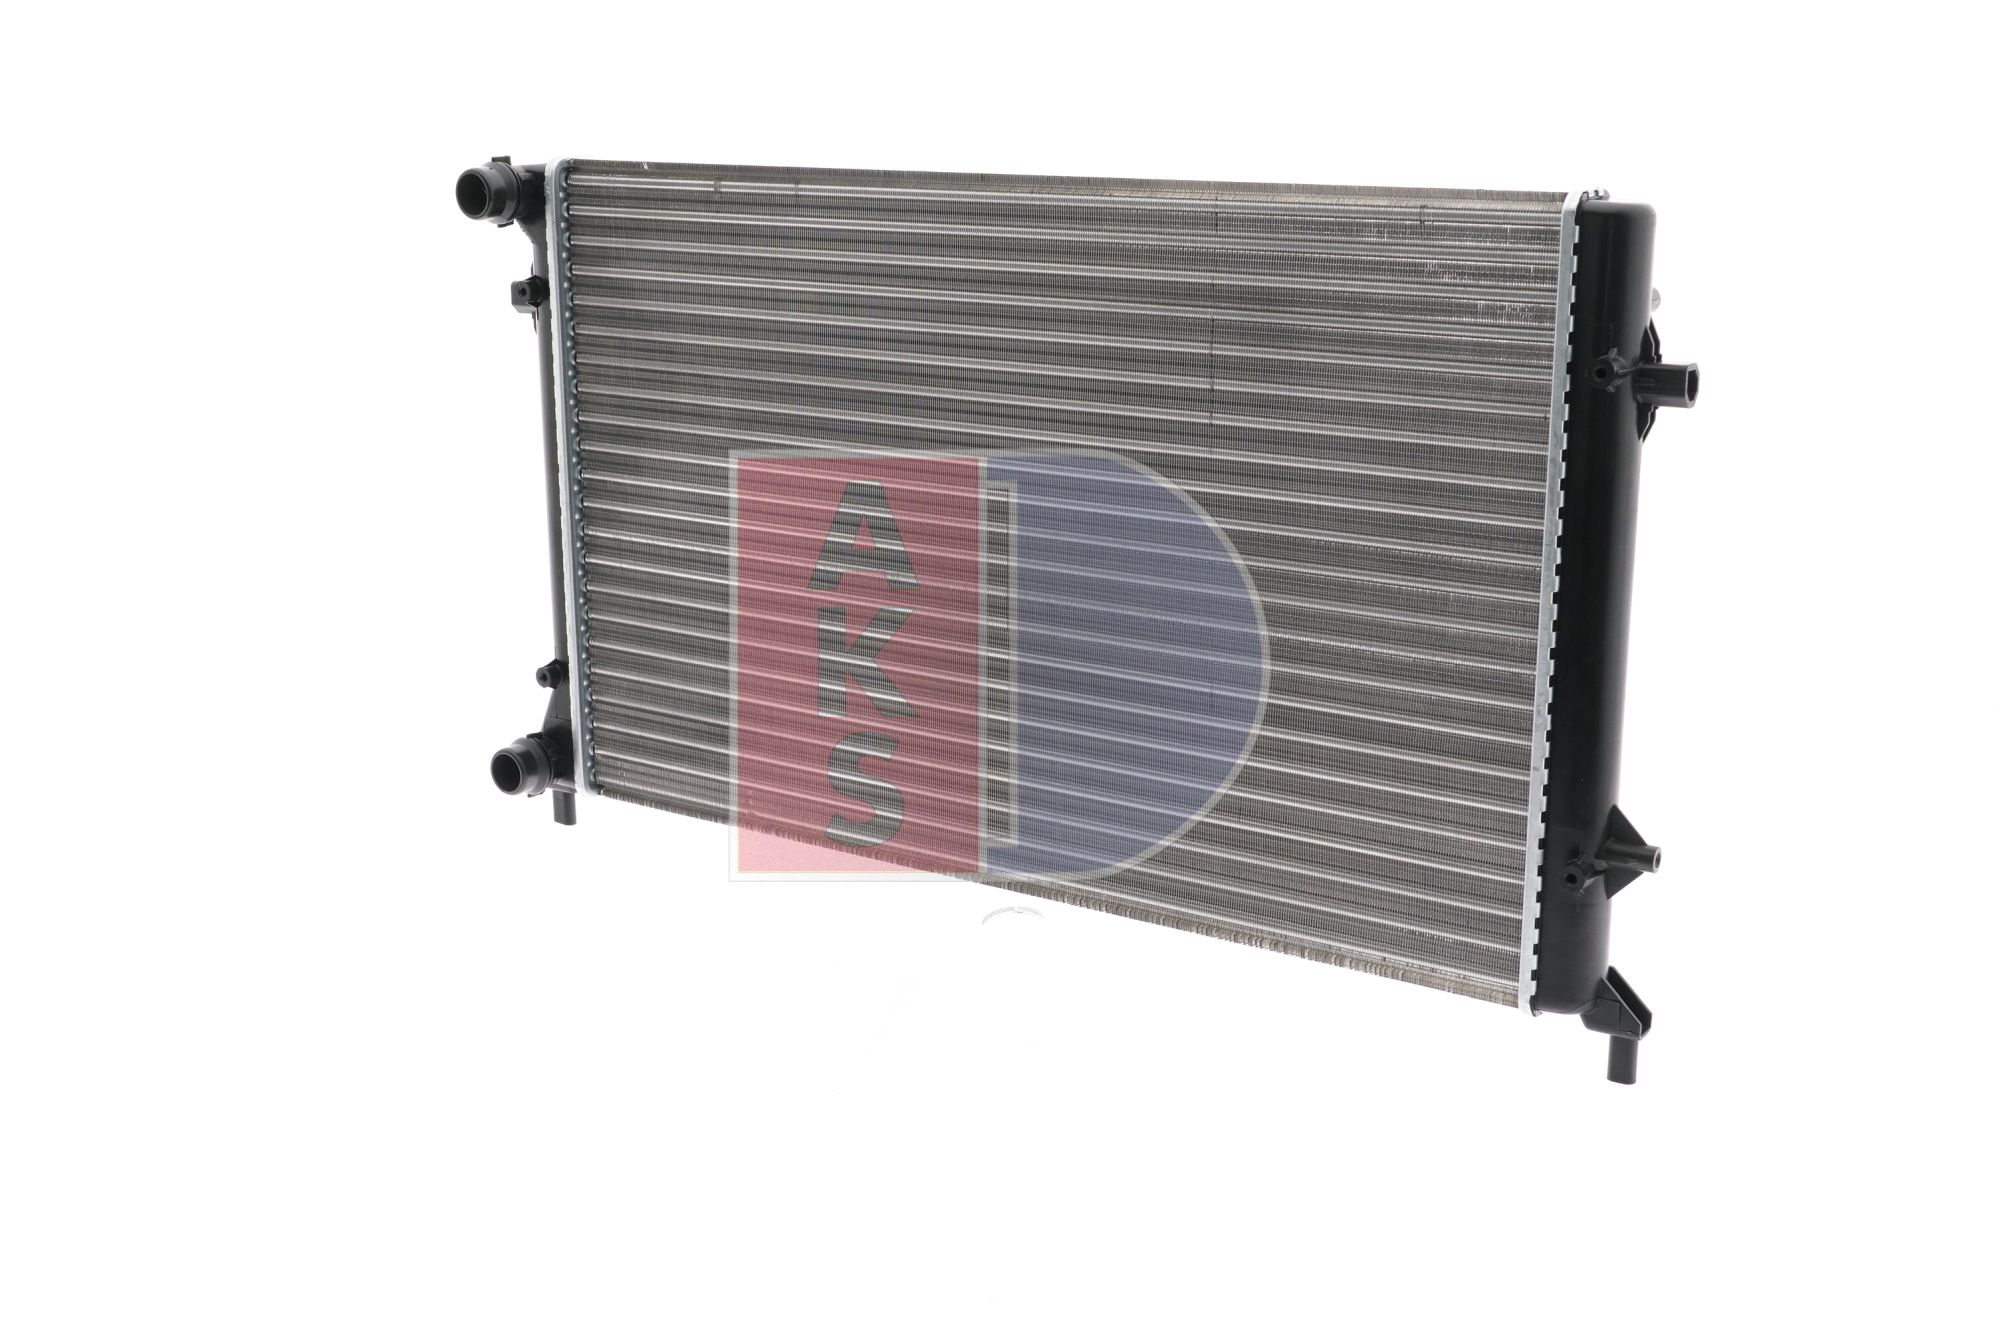 AKS DASIS 040022N Engine radiator 647 x 398 x 16 mm, Mechanically jointed cooling fins